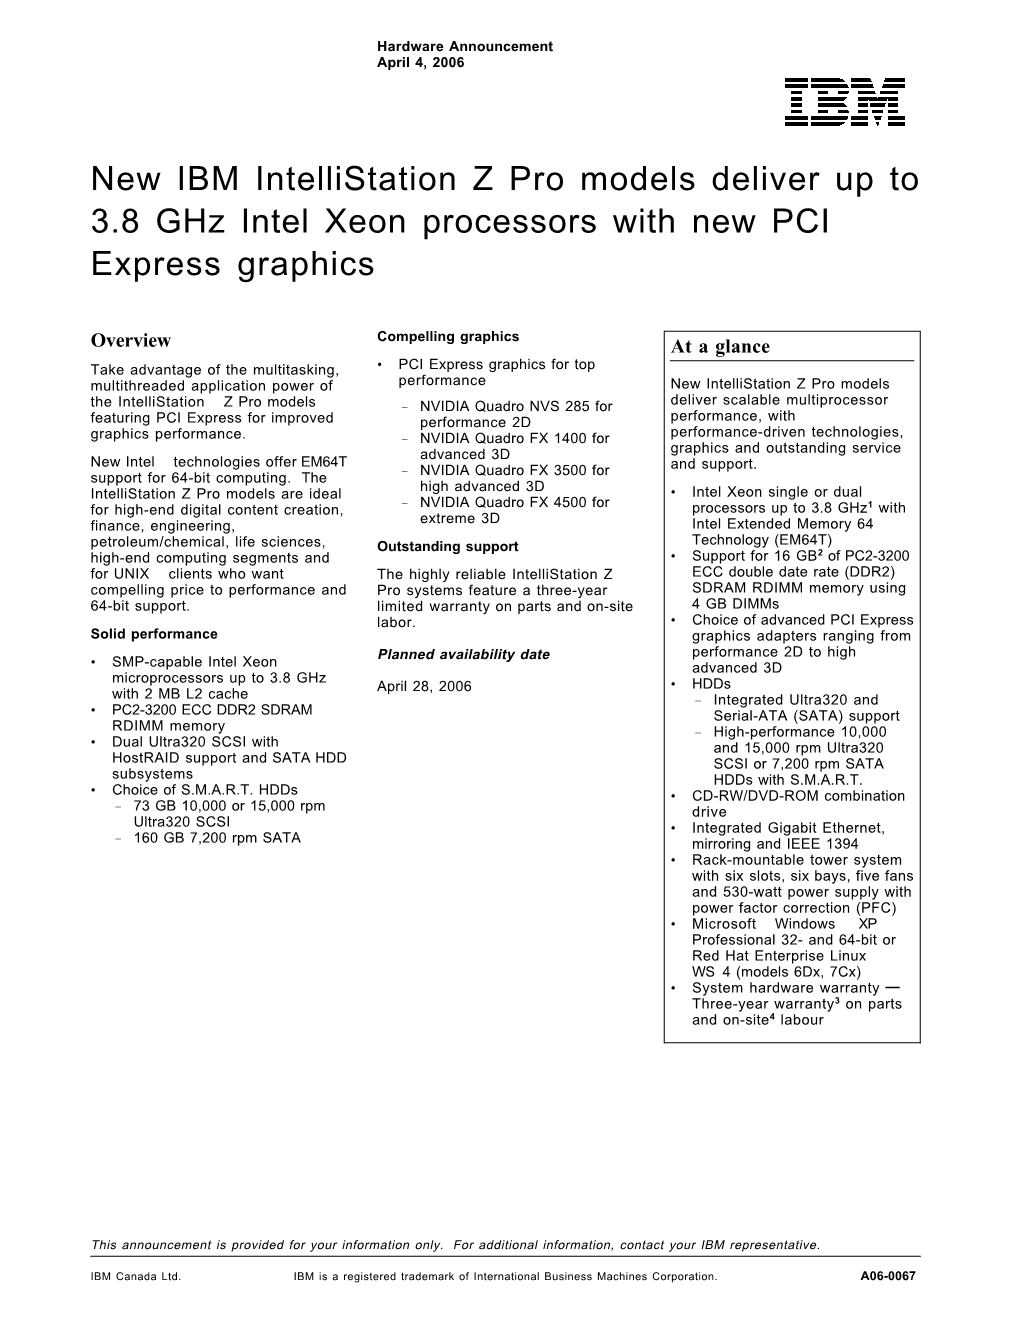 New IBM Intellistation Z Pro Models Deliver up to 3.8 Ghz Intel Xeon Processors with New PCI Express Graphics